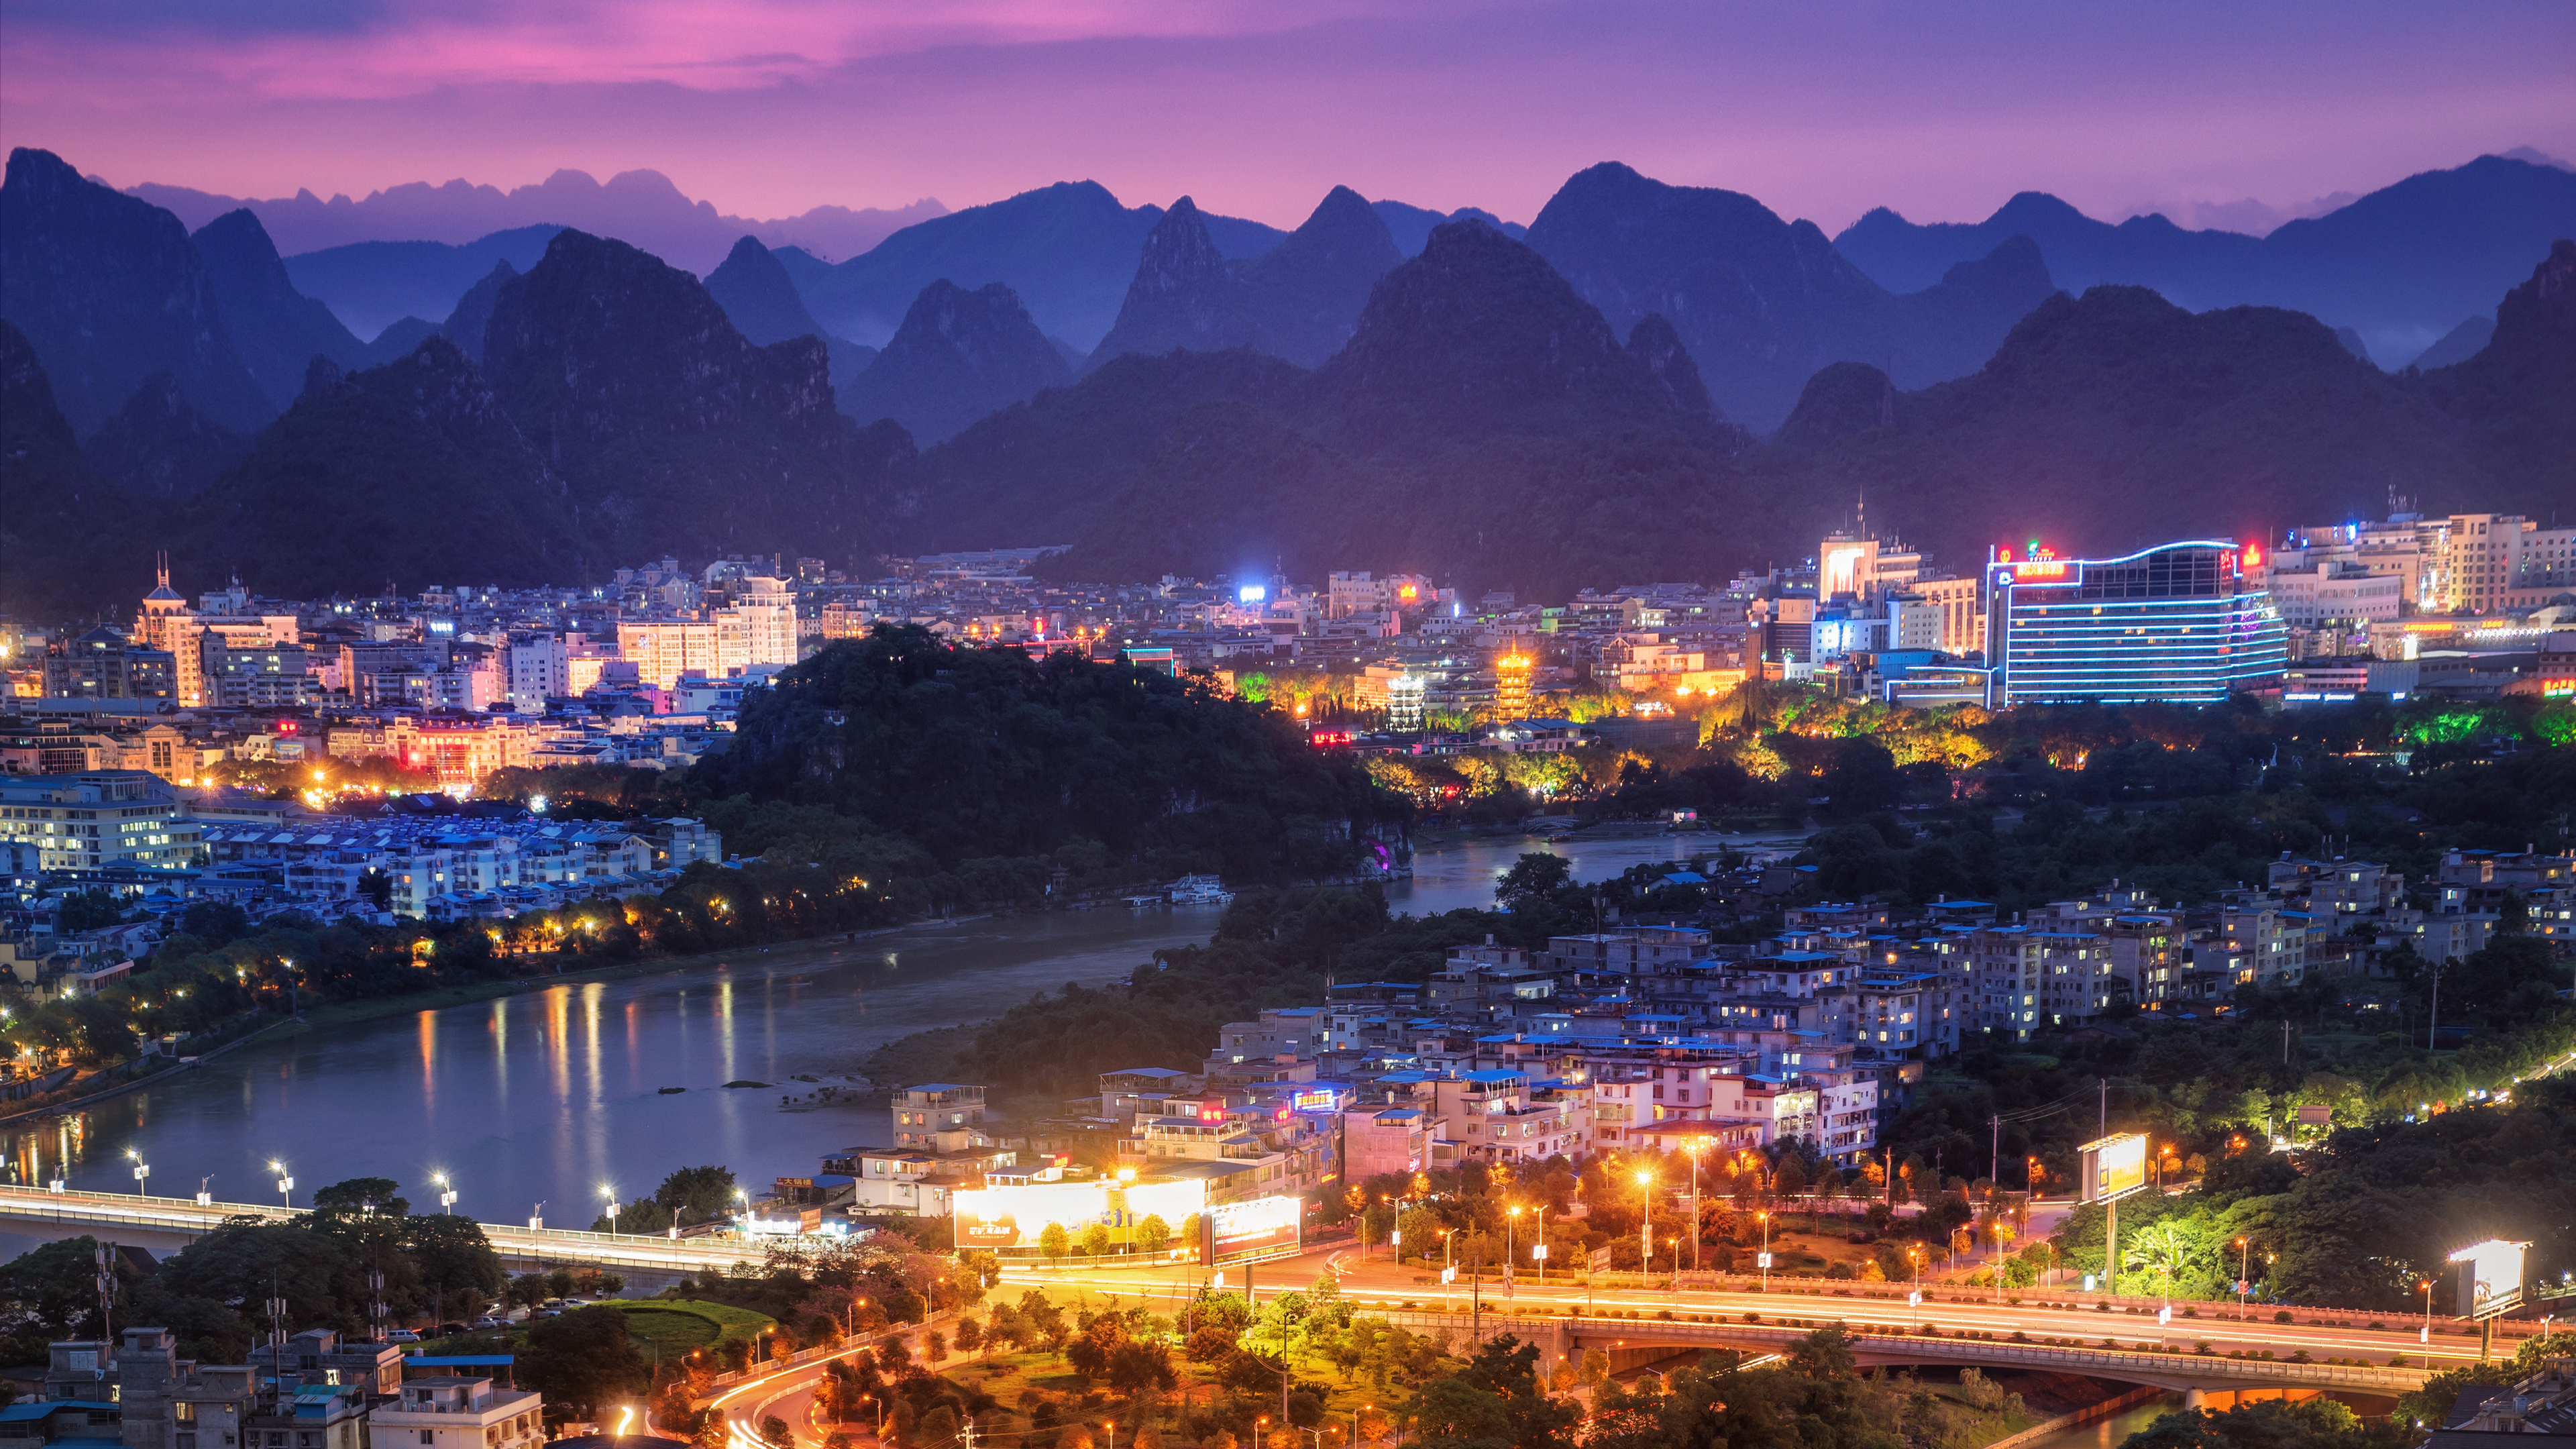 Cityscape 4K Building Water Night Lights Mountains Hills Bridge River Guilin China City 3840x2160